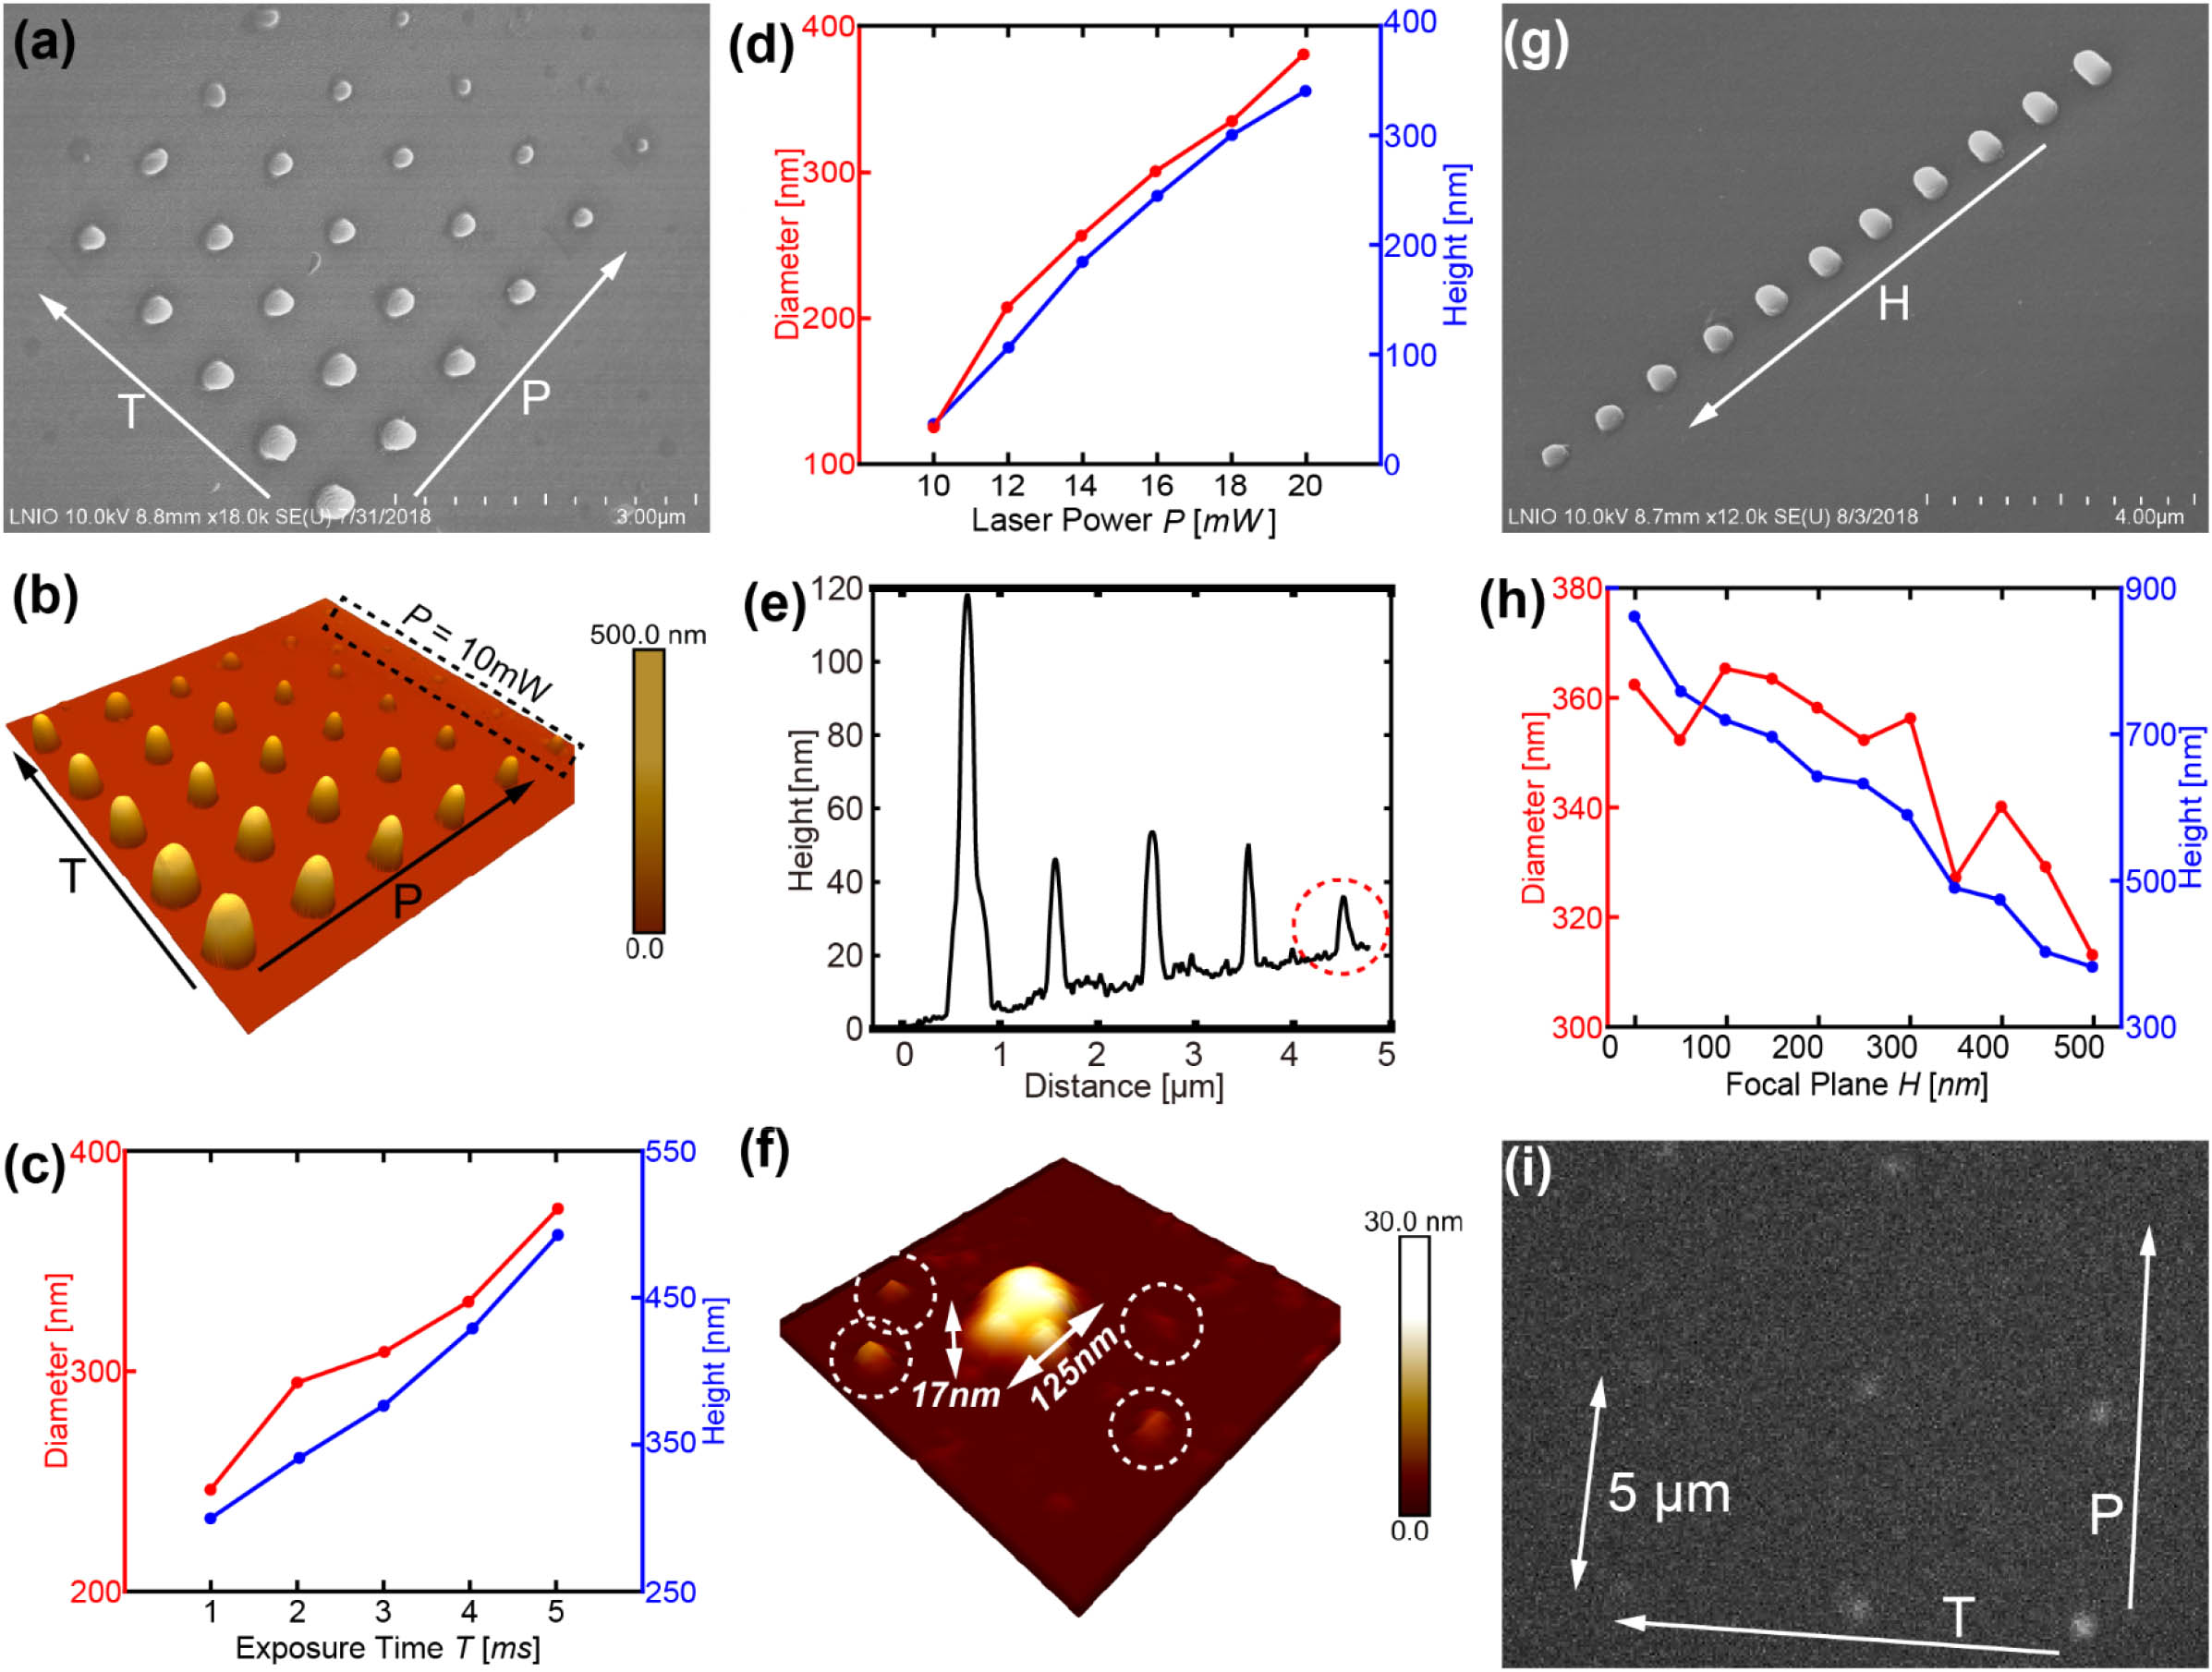 Characterization of QD-polymer voxels. Tilt-view (a) SEM image and (b) AFM image of the voxel array with laser powers P (10 to 20 mW using 2 mW steps) and exposure time T (1 to 5 ms using 1 ms steps). The default value H in this sample is 0 nm. (c), (d) Dependence of the height and diameter of single voxel structures in function of P and T, respectively. P=20 mW in (c), T=5 ms in (d). (e) AFM line profile of the QD-polymer voxels with P=10 mW marked with black dashed area in (b). The peak marked with the red dashed circle indicates the profile of the smallest voxel with T=1 ms, which is shown in the AFM image (not to scale) in (f). Four dots marked with white dashed circles are QDs surrounded by a polymer layer. Tilt-view (b) SEM image and (h) size dependence of an array of voxel structures by only changing the focal plane H (0 to 500 nm using 50 nm steps), with P=20 mW and T=5 ms. (i) Measured PL image of a voxel array with 5 μm of distance between voxels.